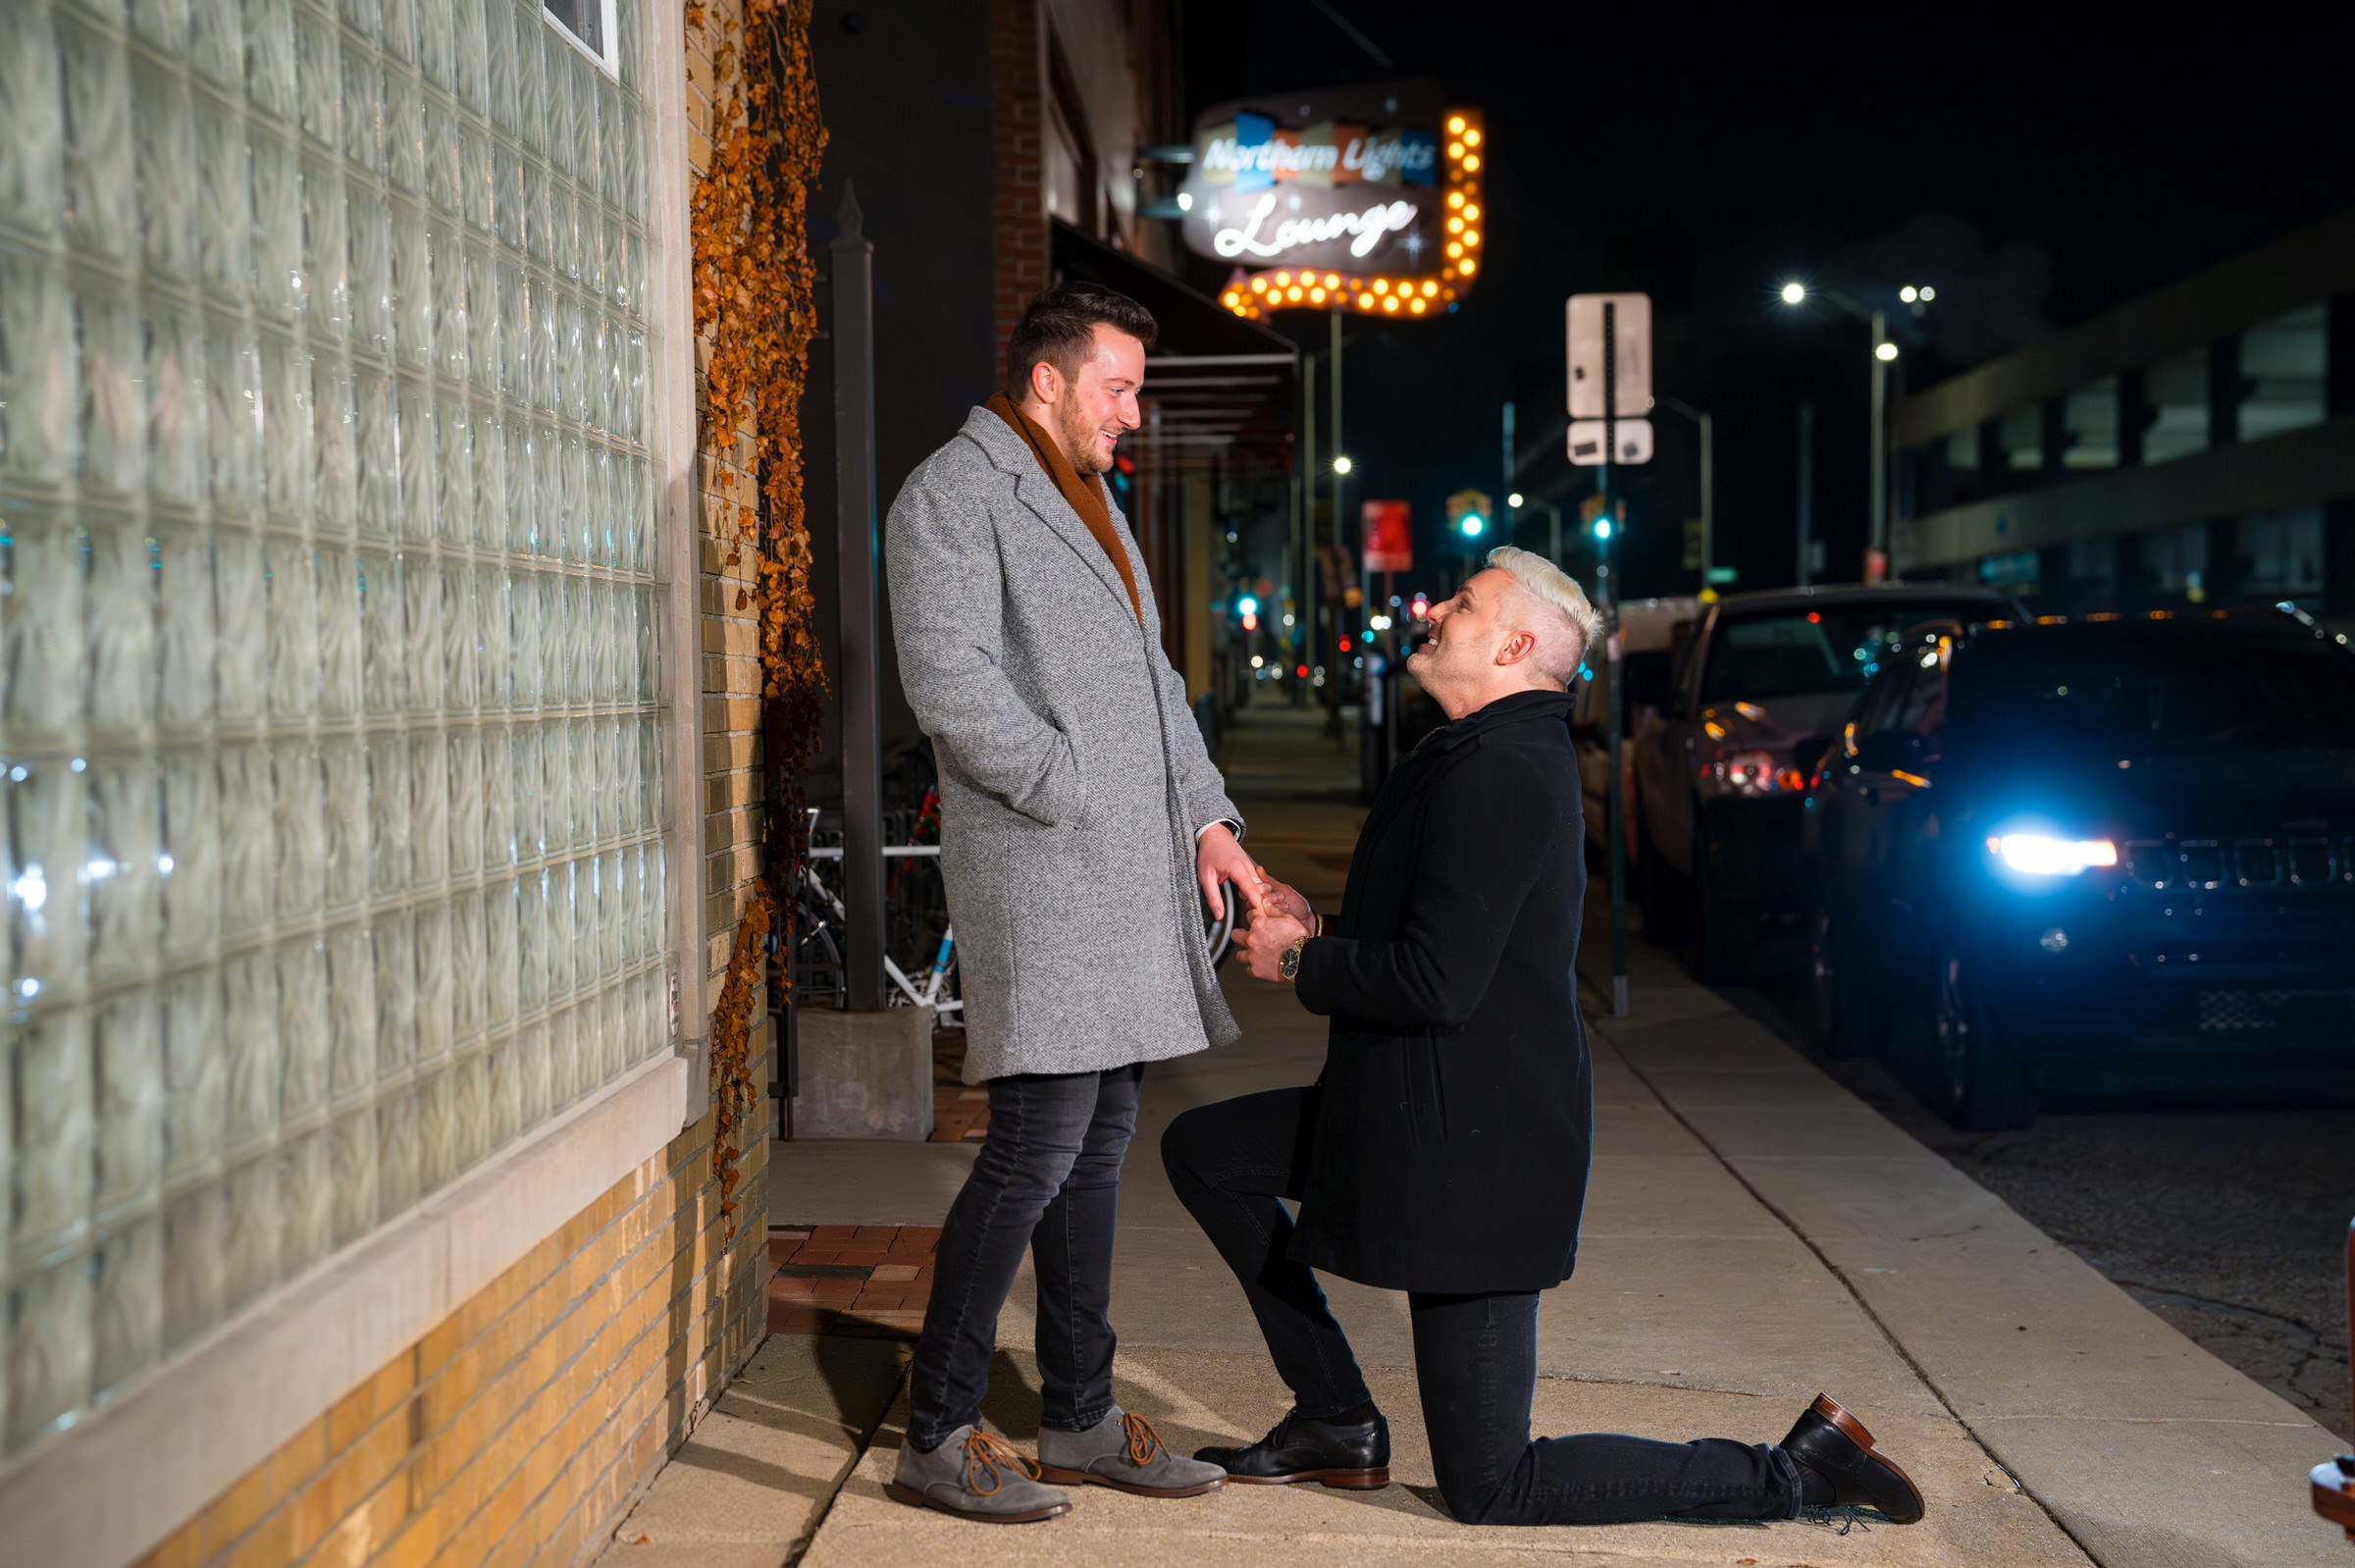 A Northern Lights proposal takes place in New Center Detroit outside on a winter night.  